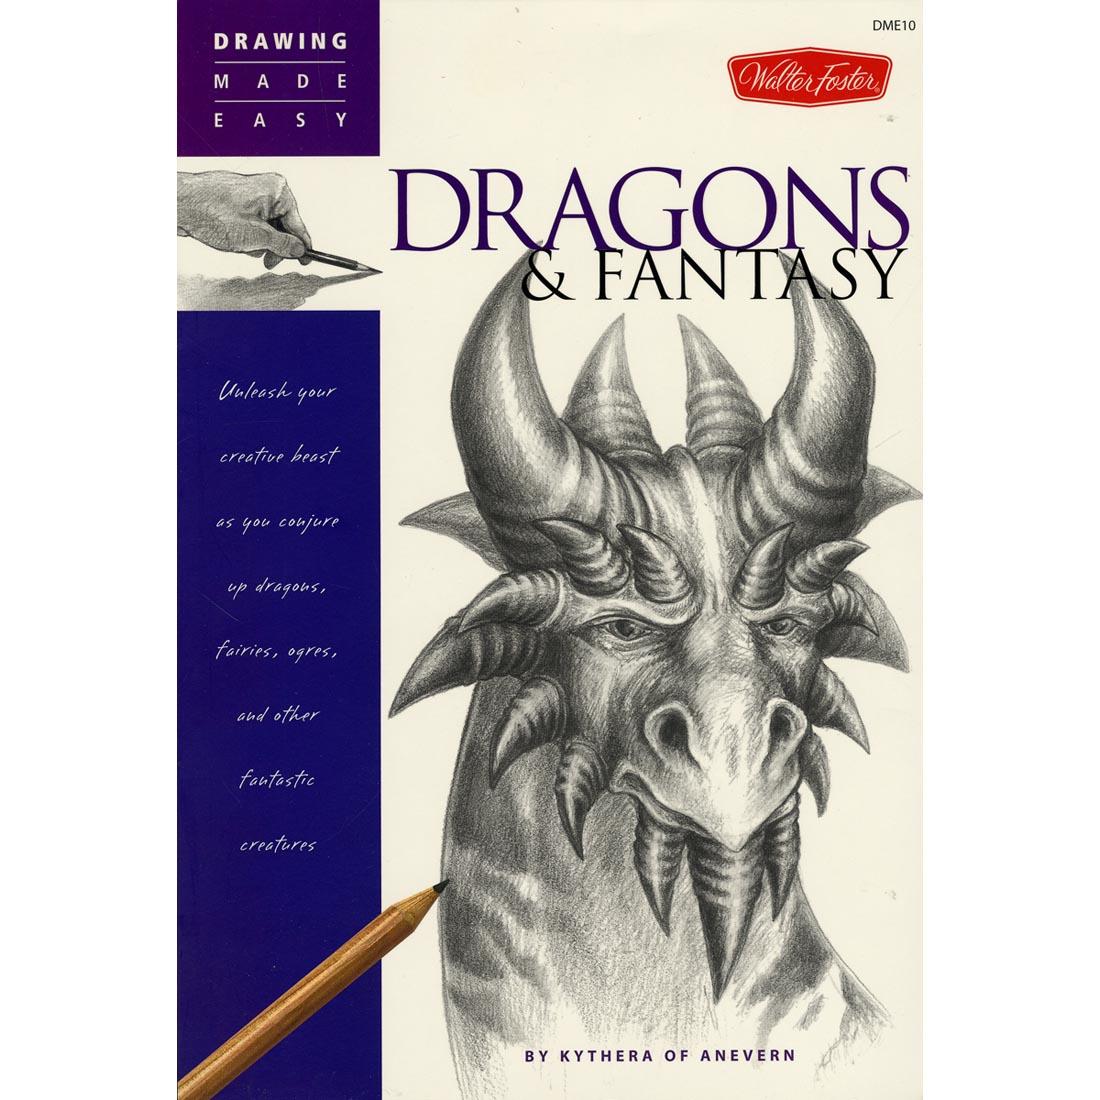 cover of book - Walter Foster Drawing Made Easy: Dragons and Fantasy